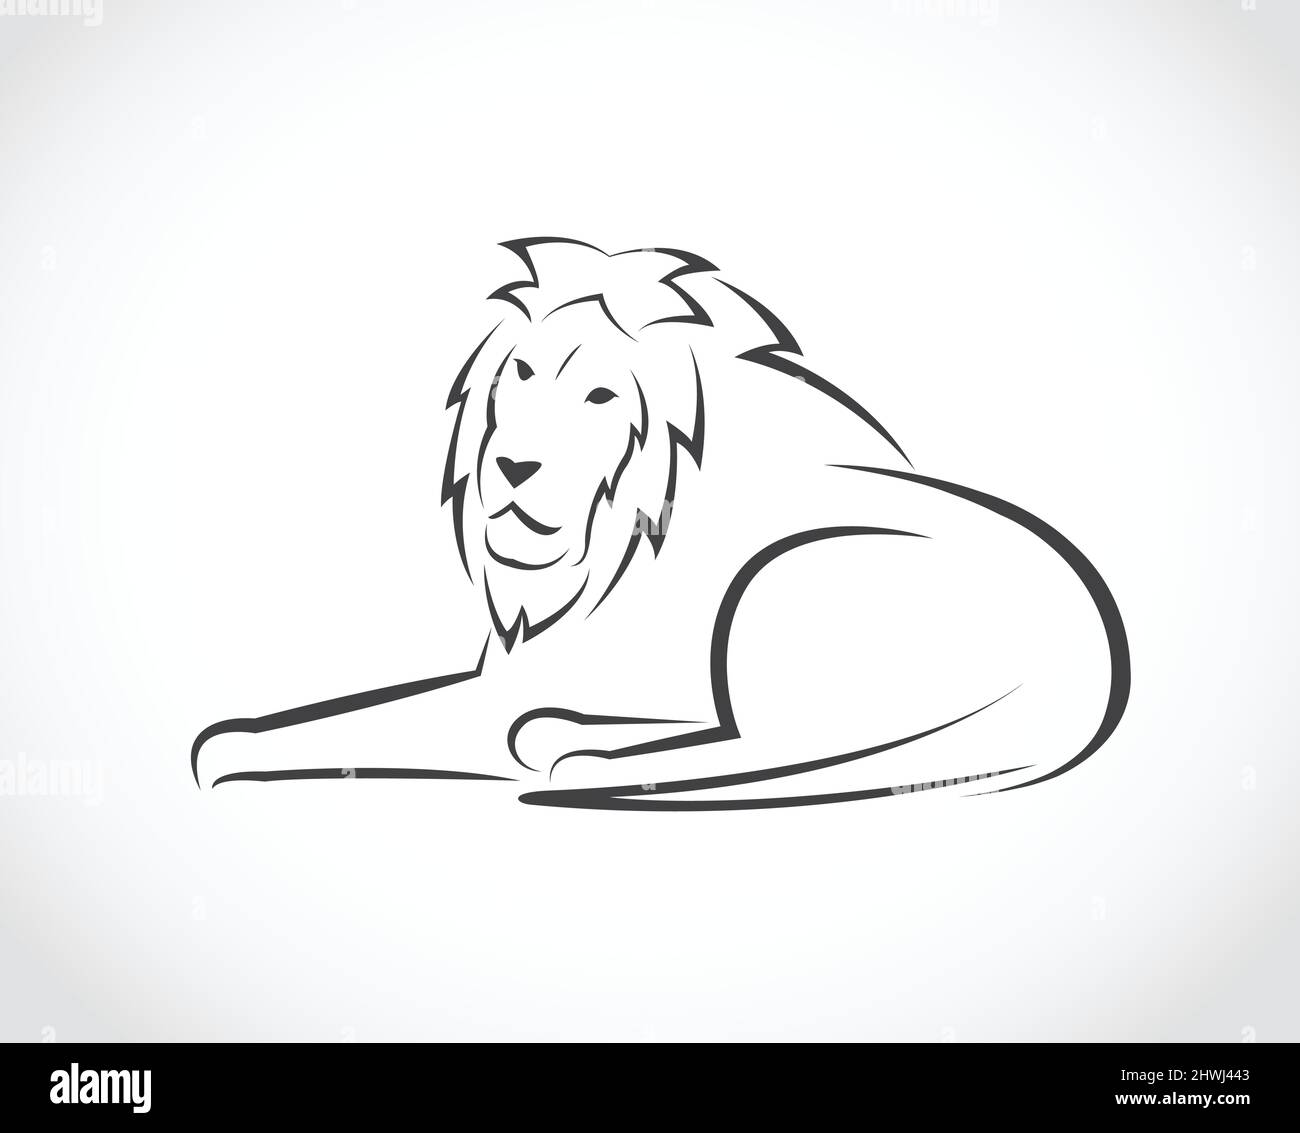 Vector image of a lion on white background. Easy editable layered vector illustration. Stock Vector